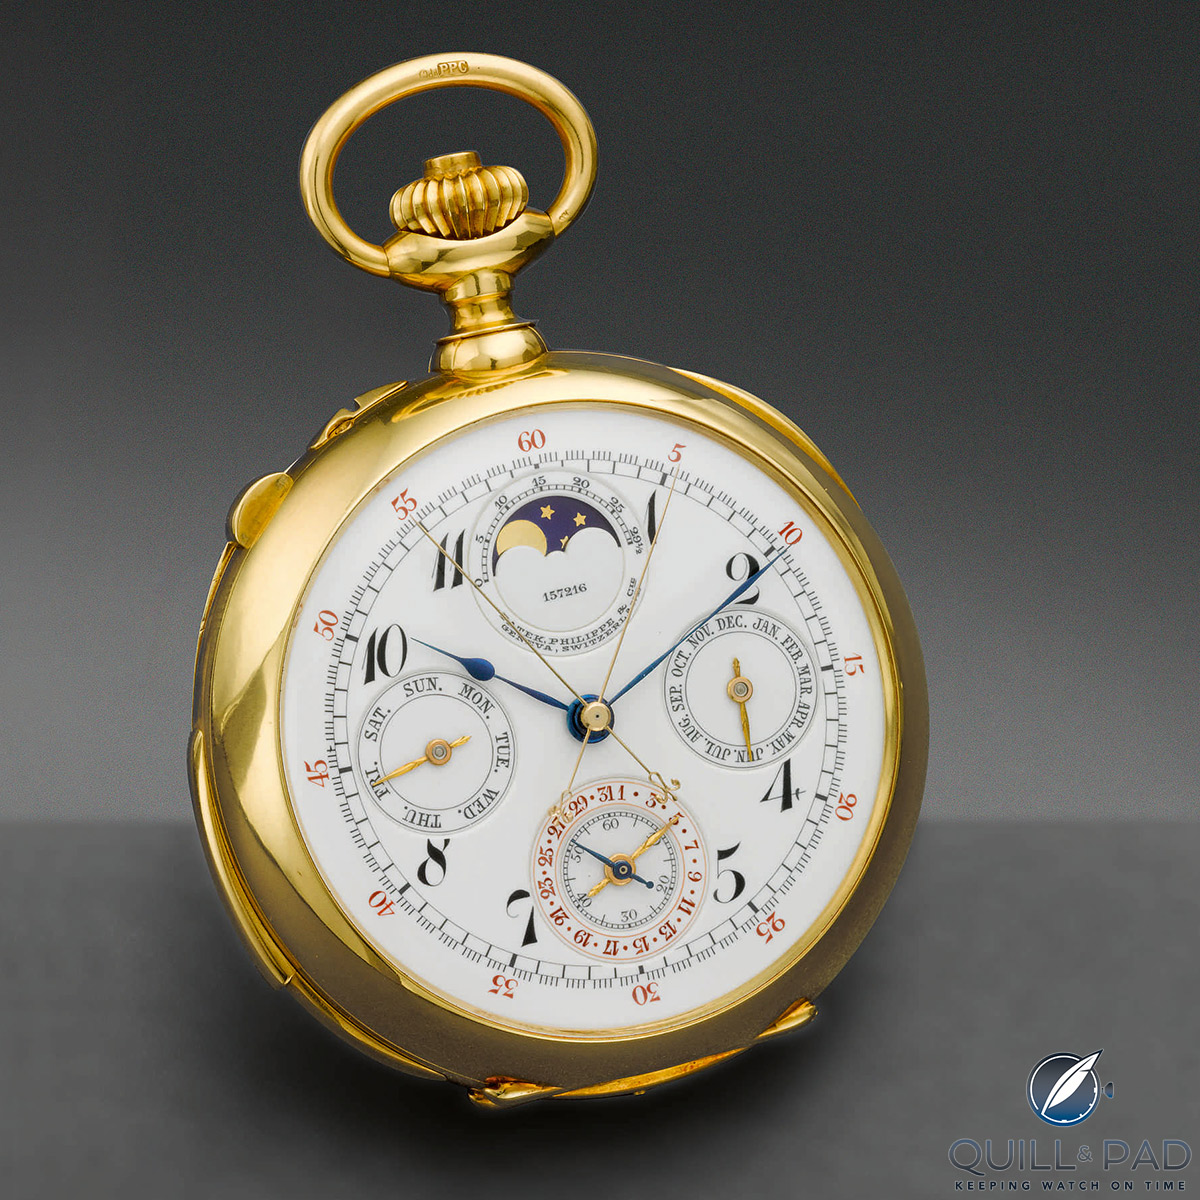 This Patek Philippe grand complication pocket watch achieved a top-ten ranking in the June 2017 Sotheby’s auction